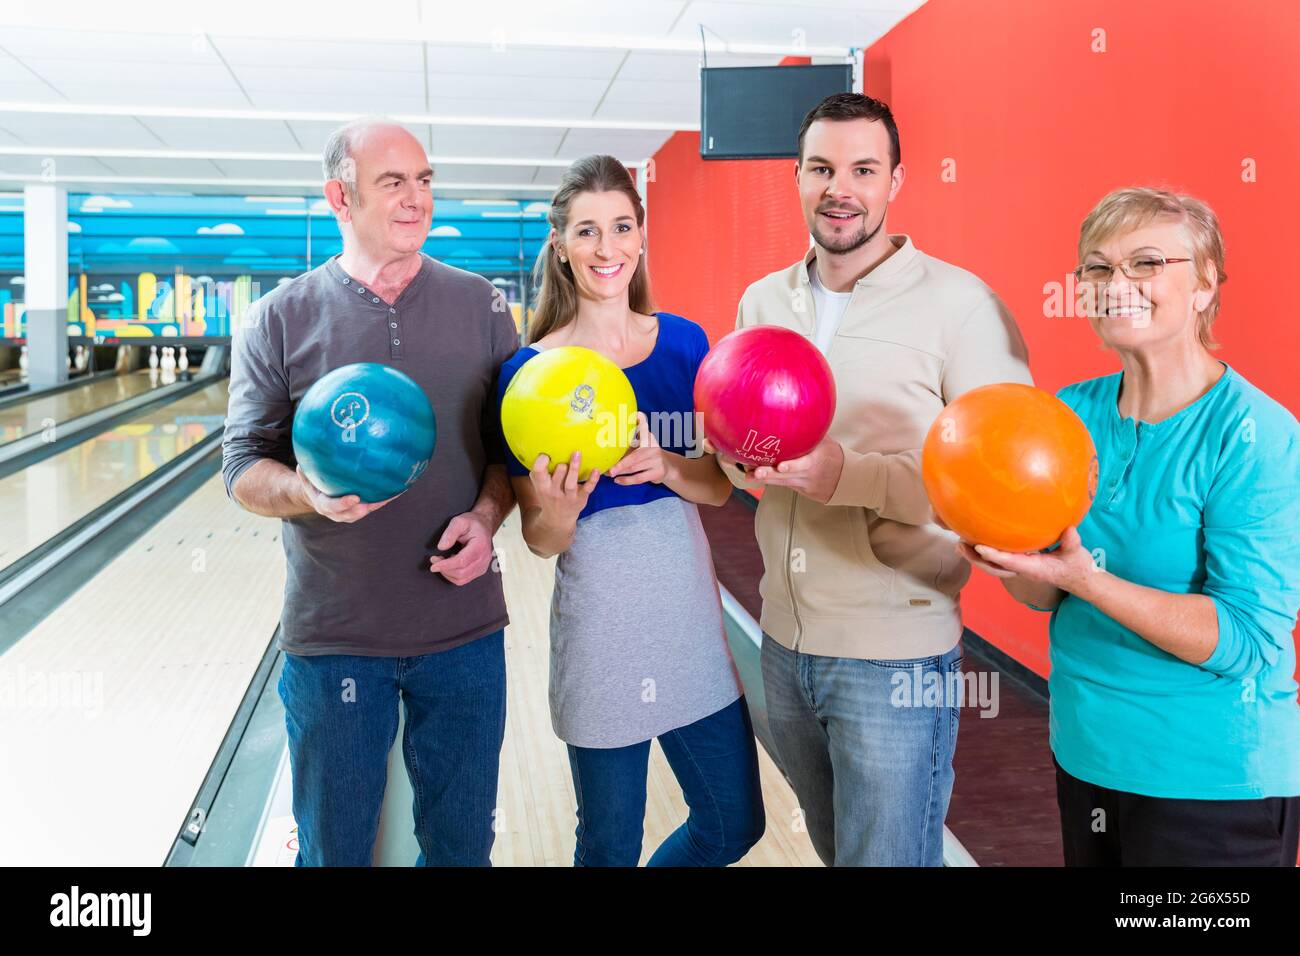 Smiling family holding multi colored bowling ball Stock Photo